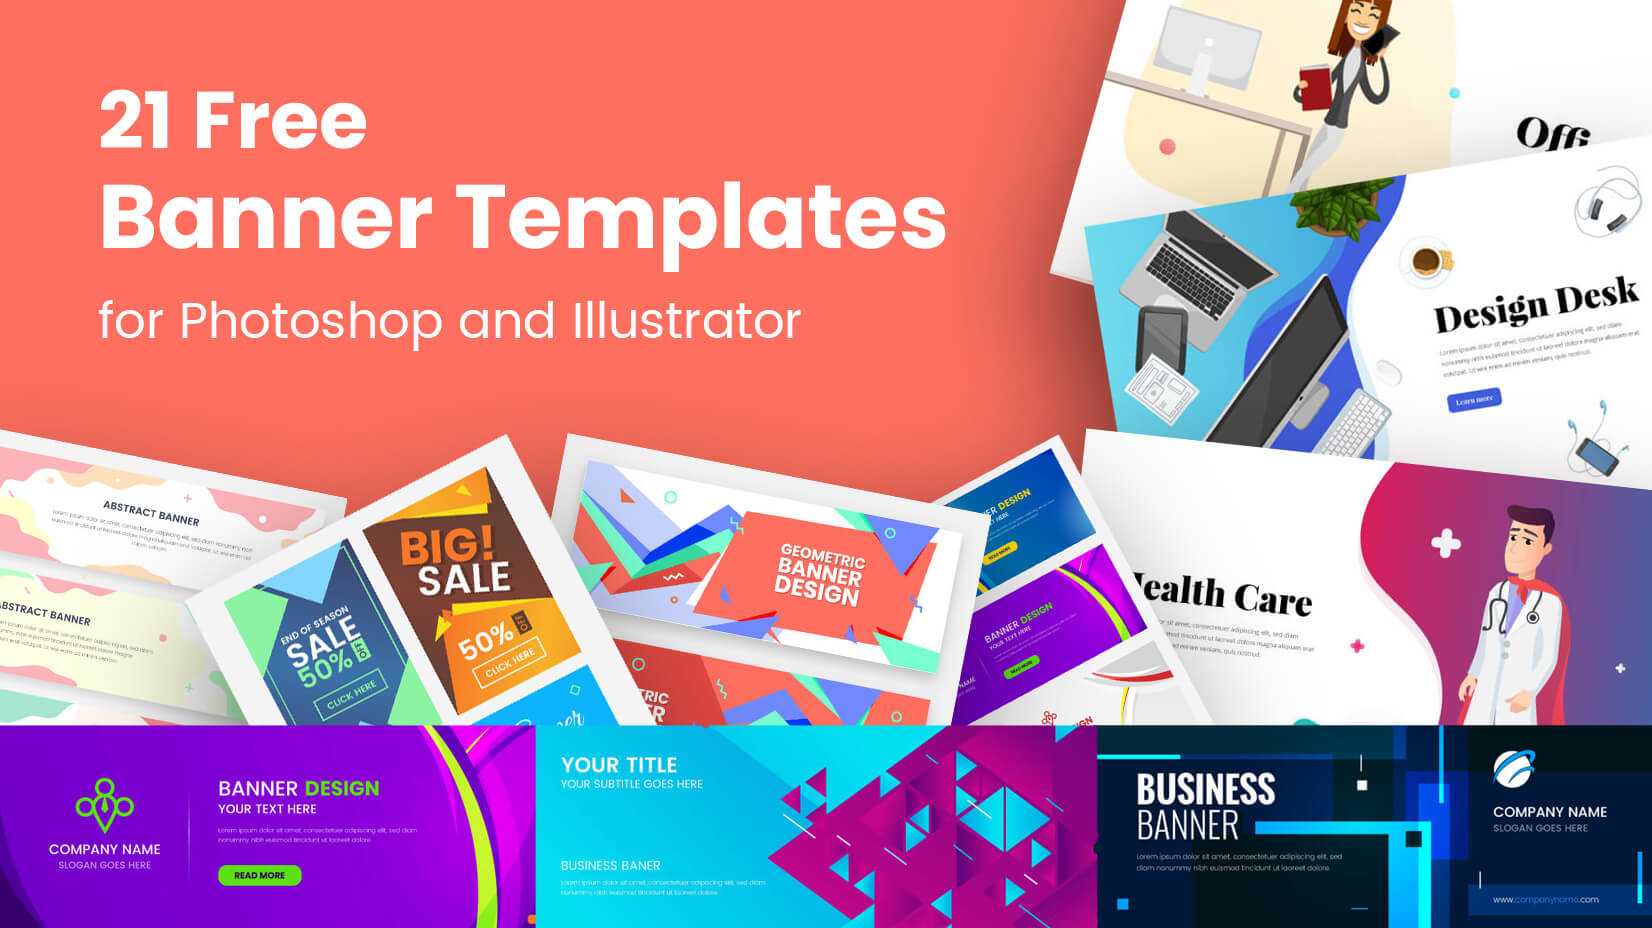 21 Free Banner Templates For Photoshop And Illustrator Intended For Adobe Photoshop Banner Templates